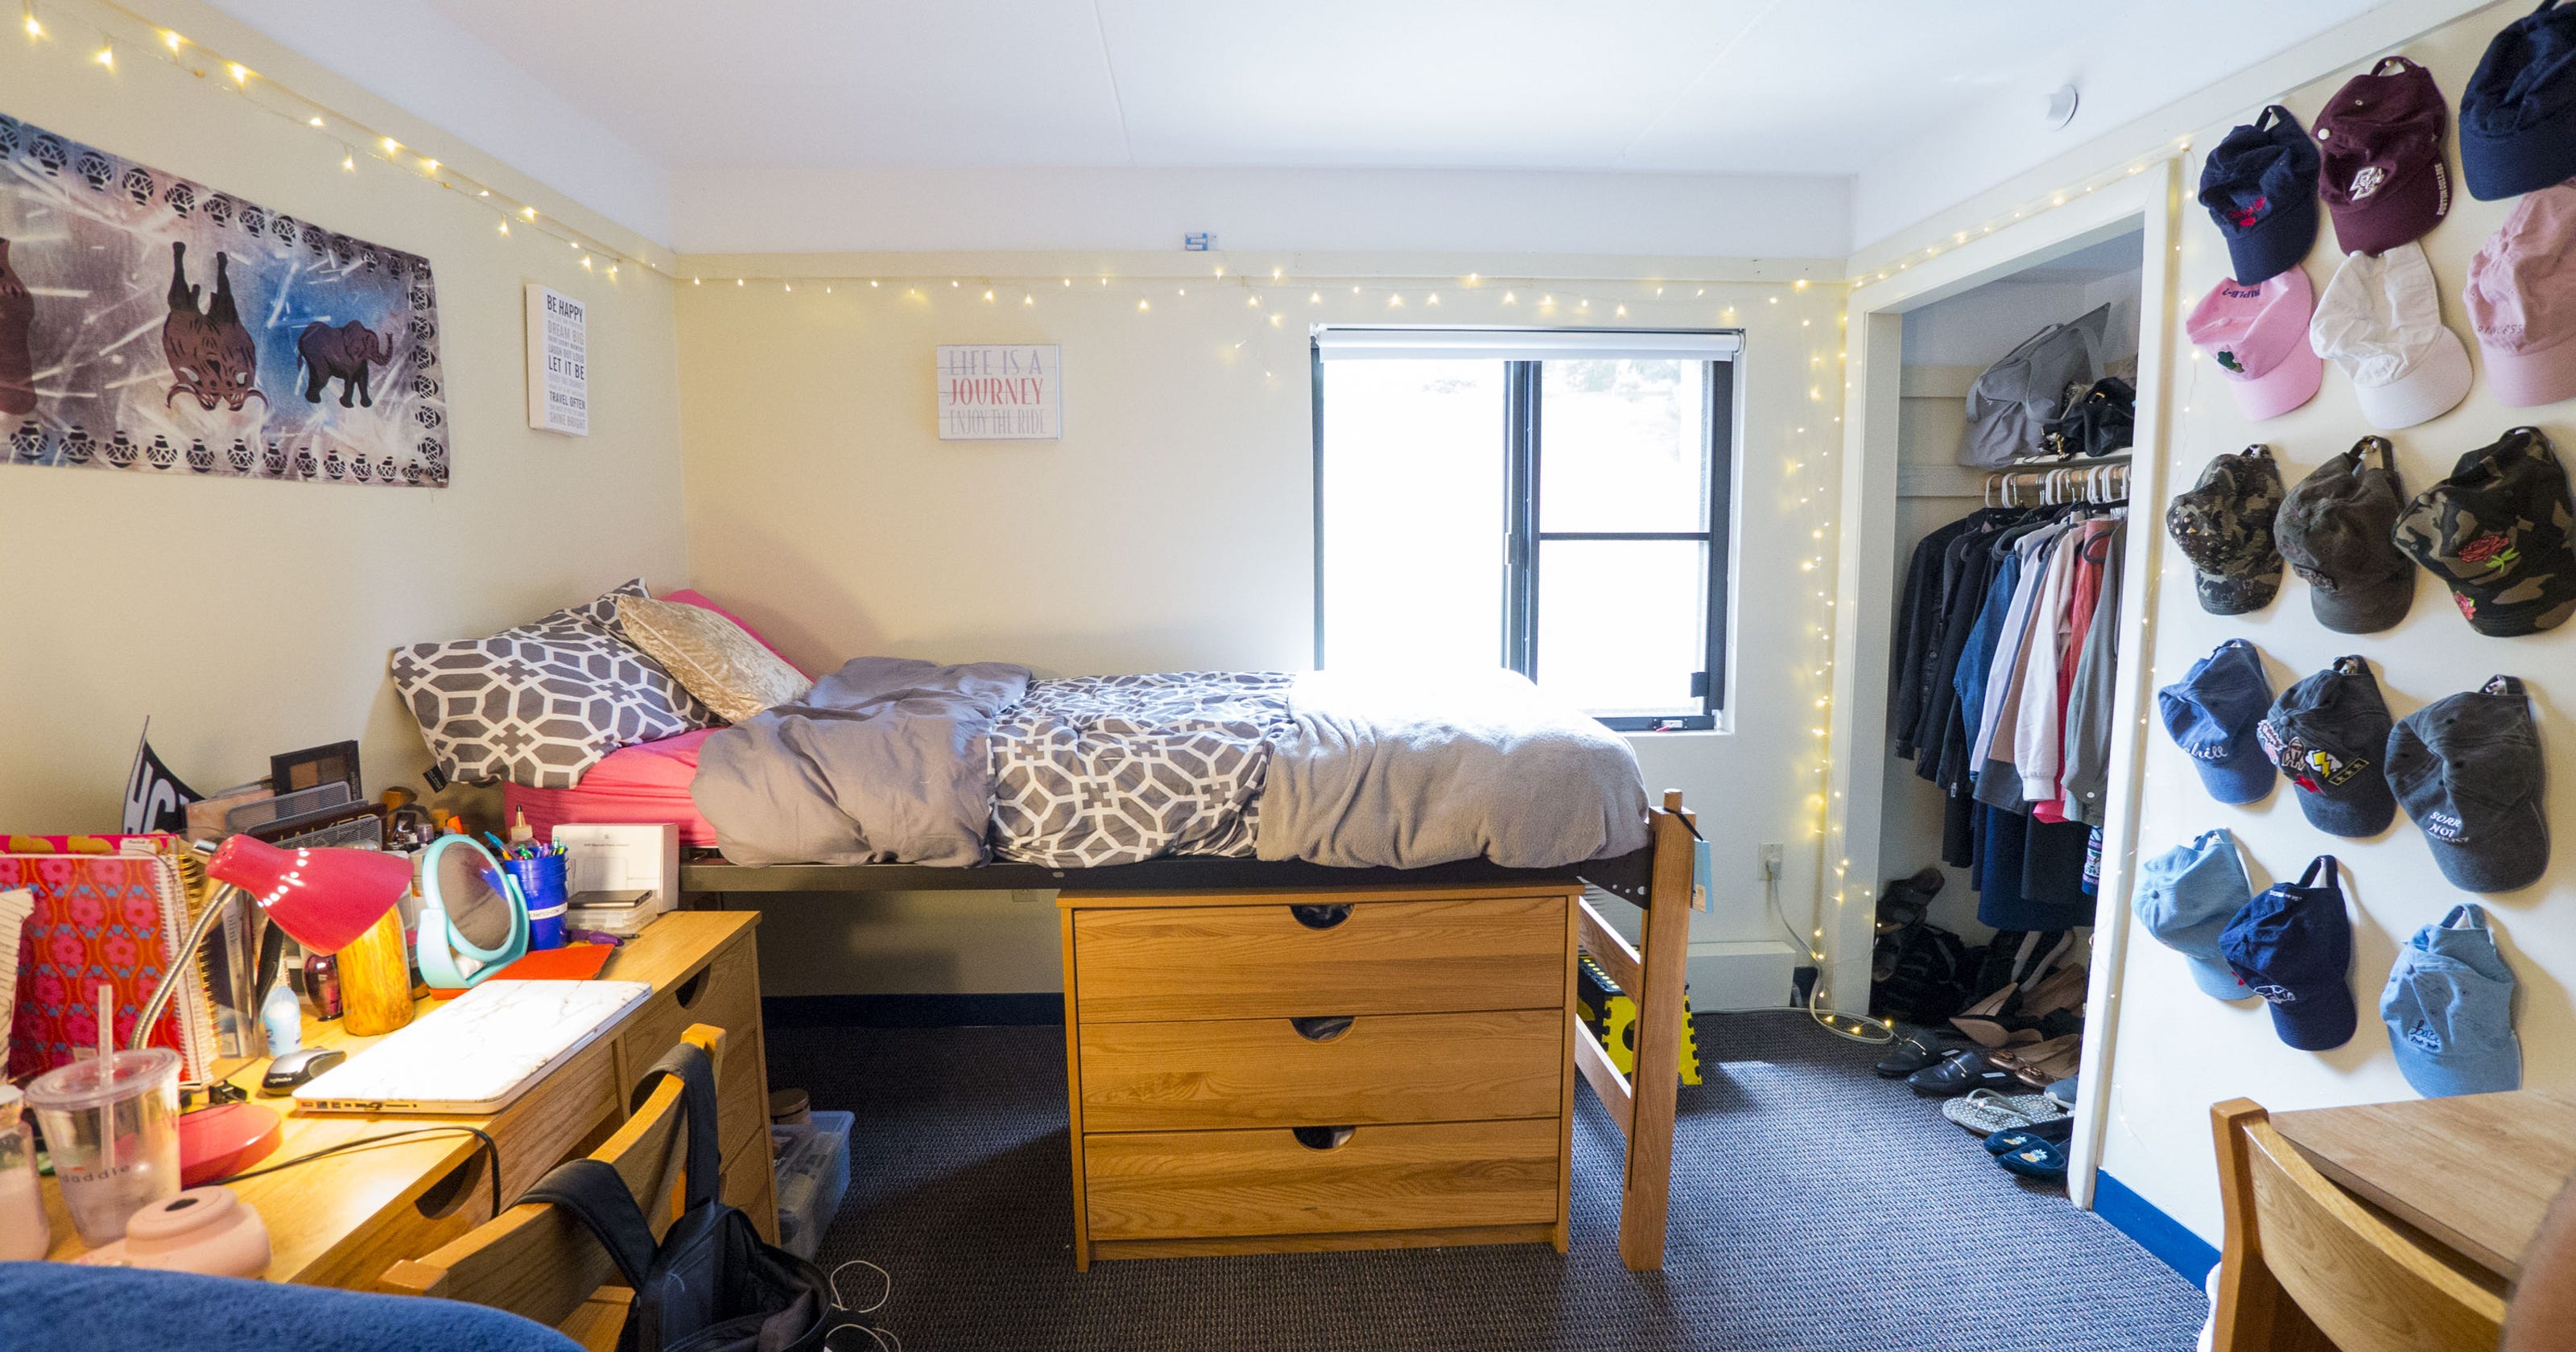 7 Ways You Can Transform A Dorm Room—without Hiring An Interior Designer